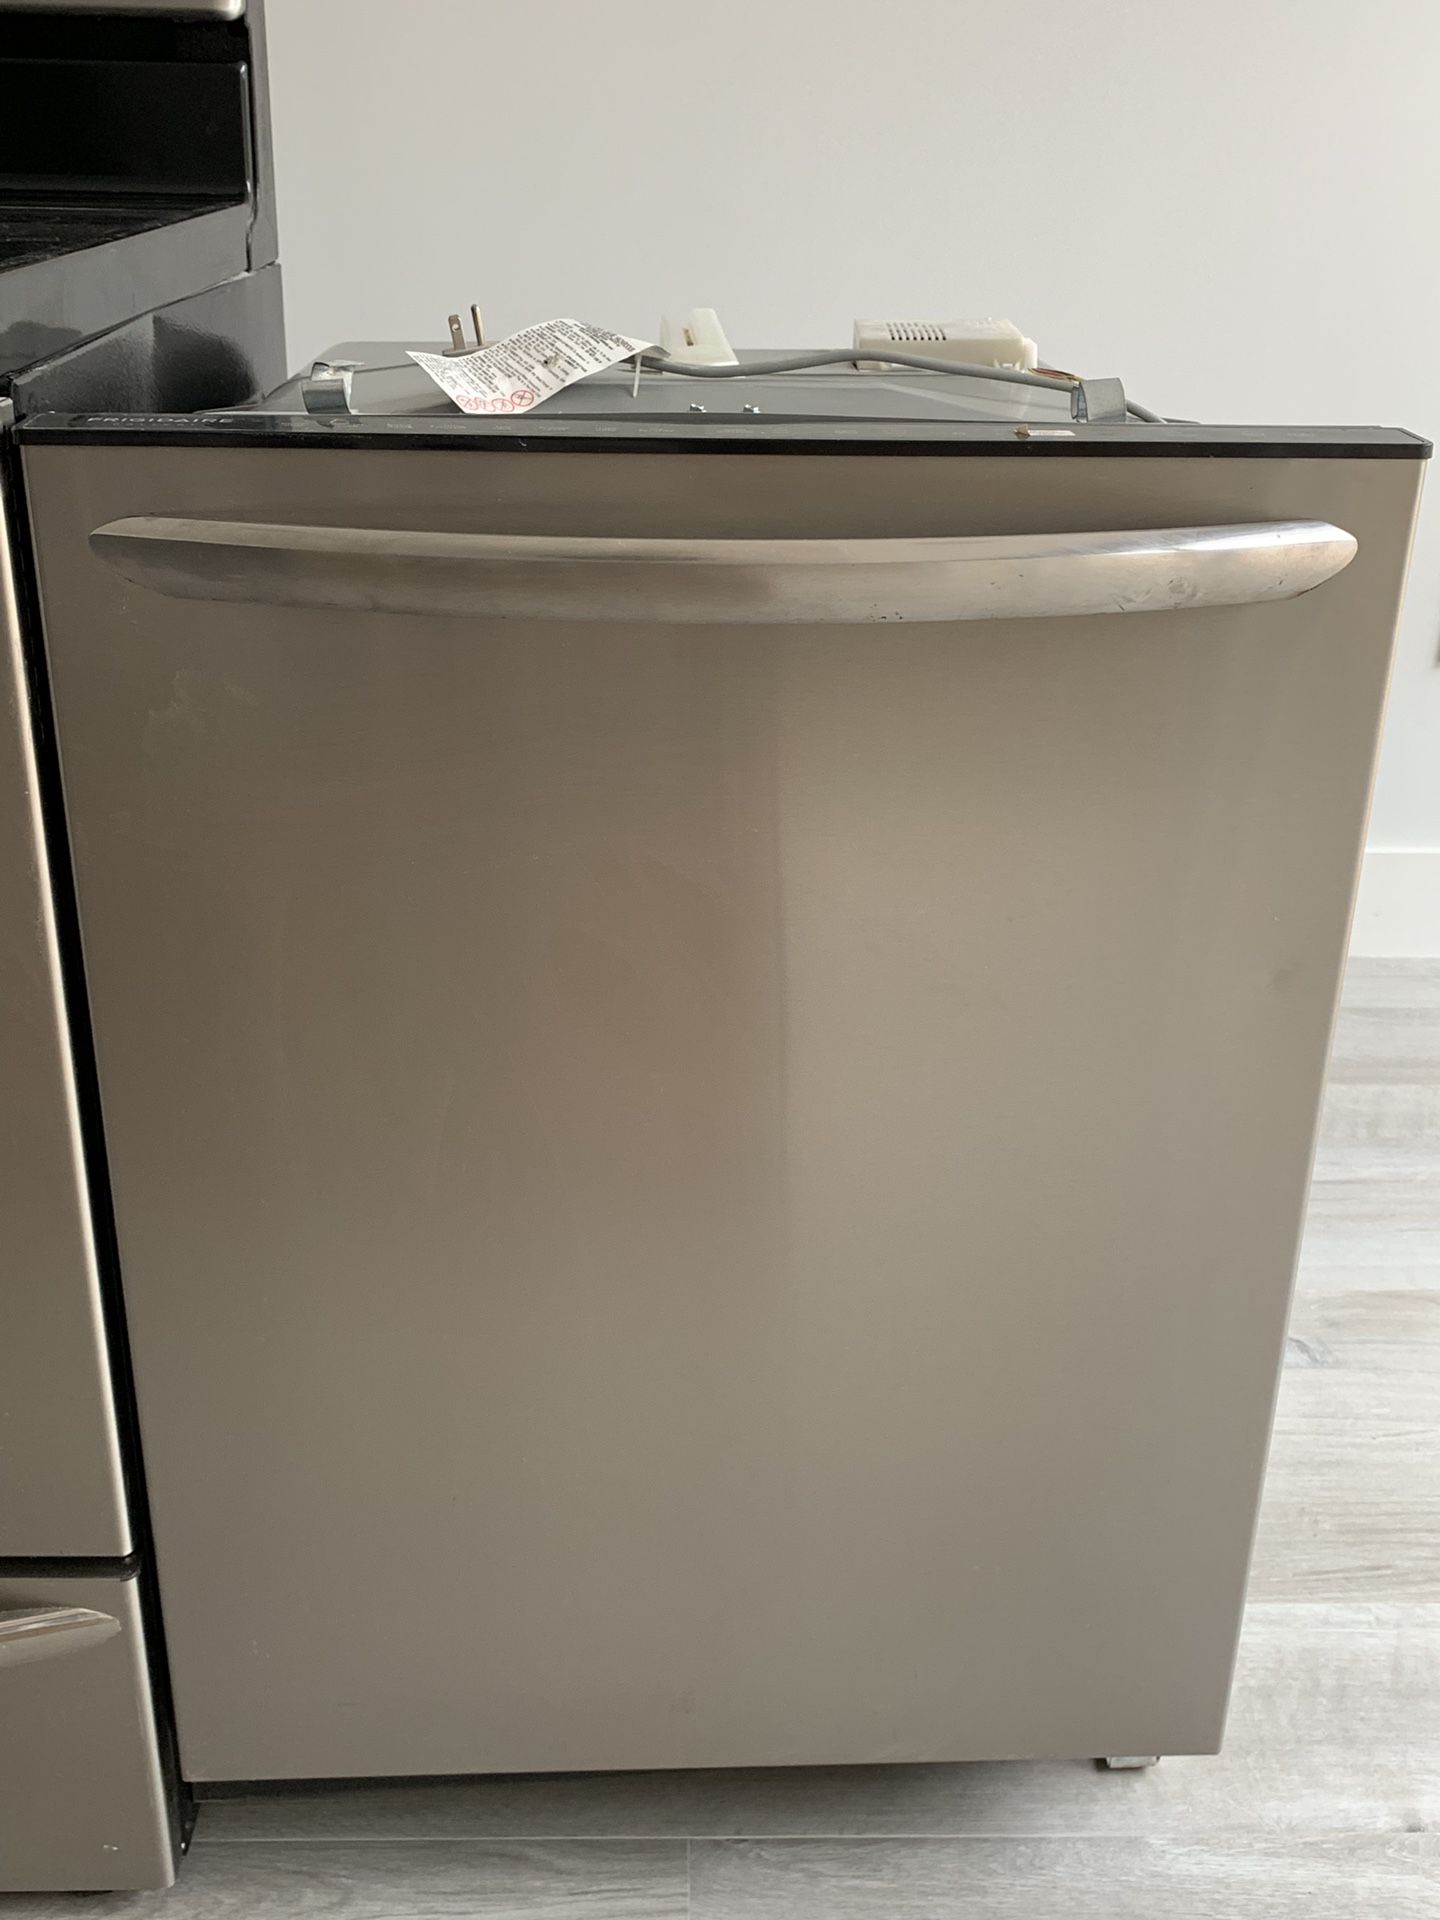 Frigidaire Gallery Top Control Built-in Dishwasher